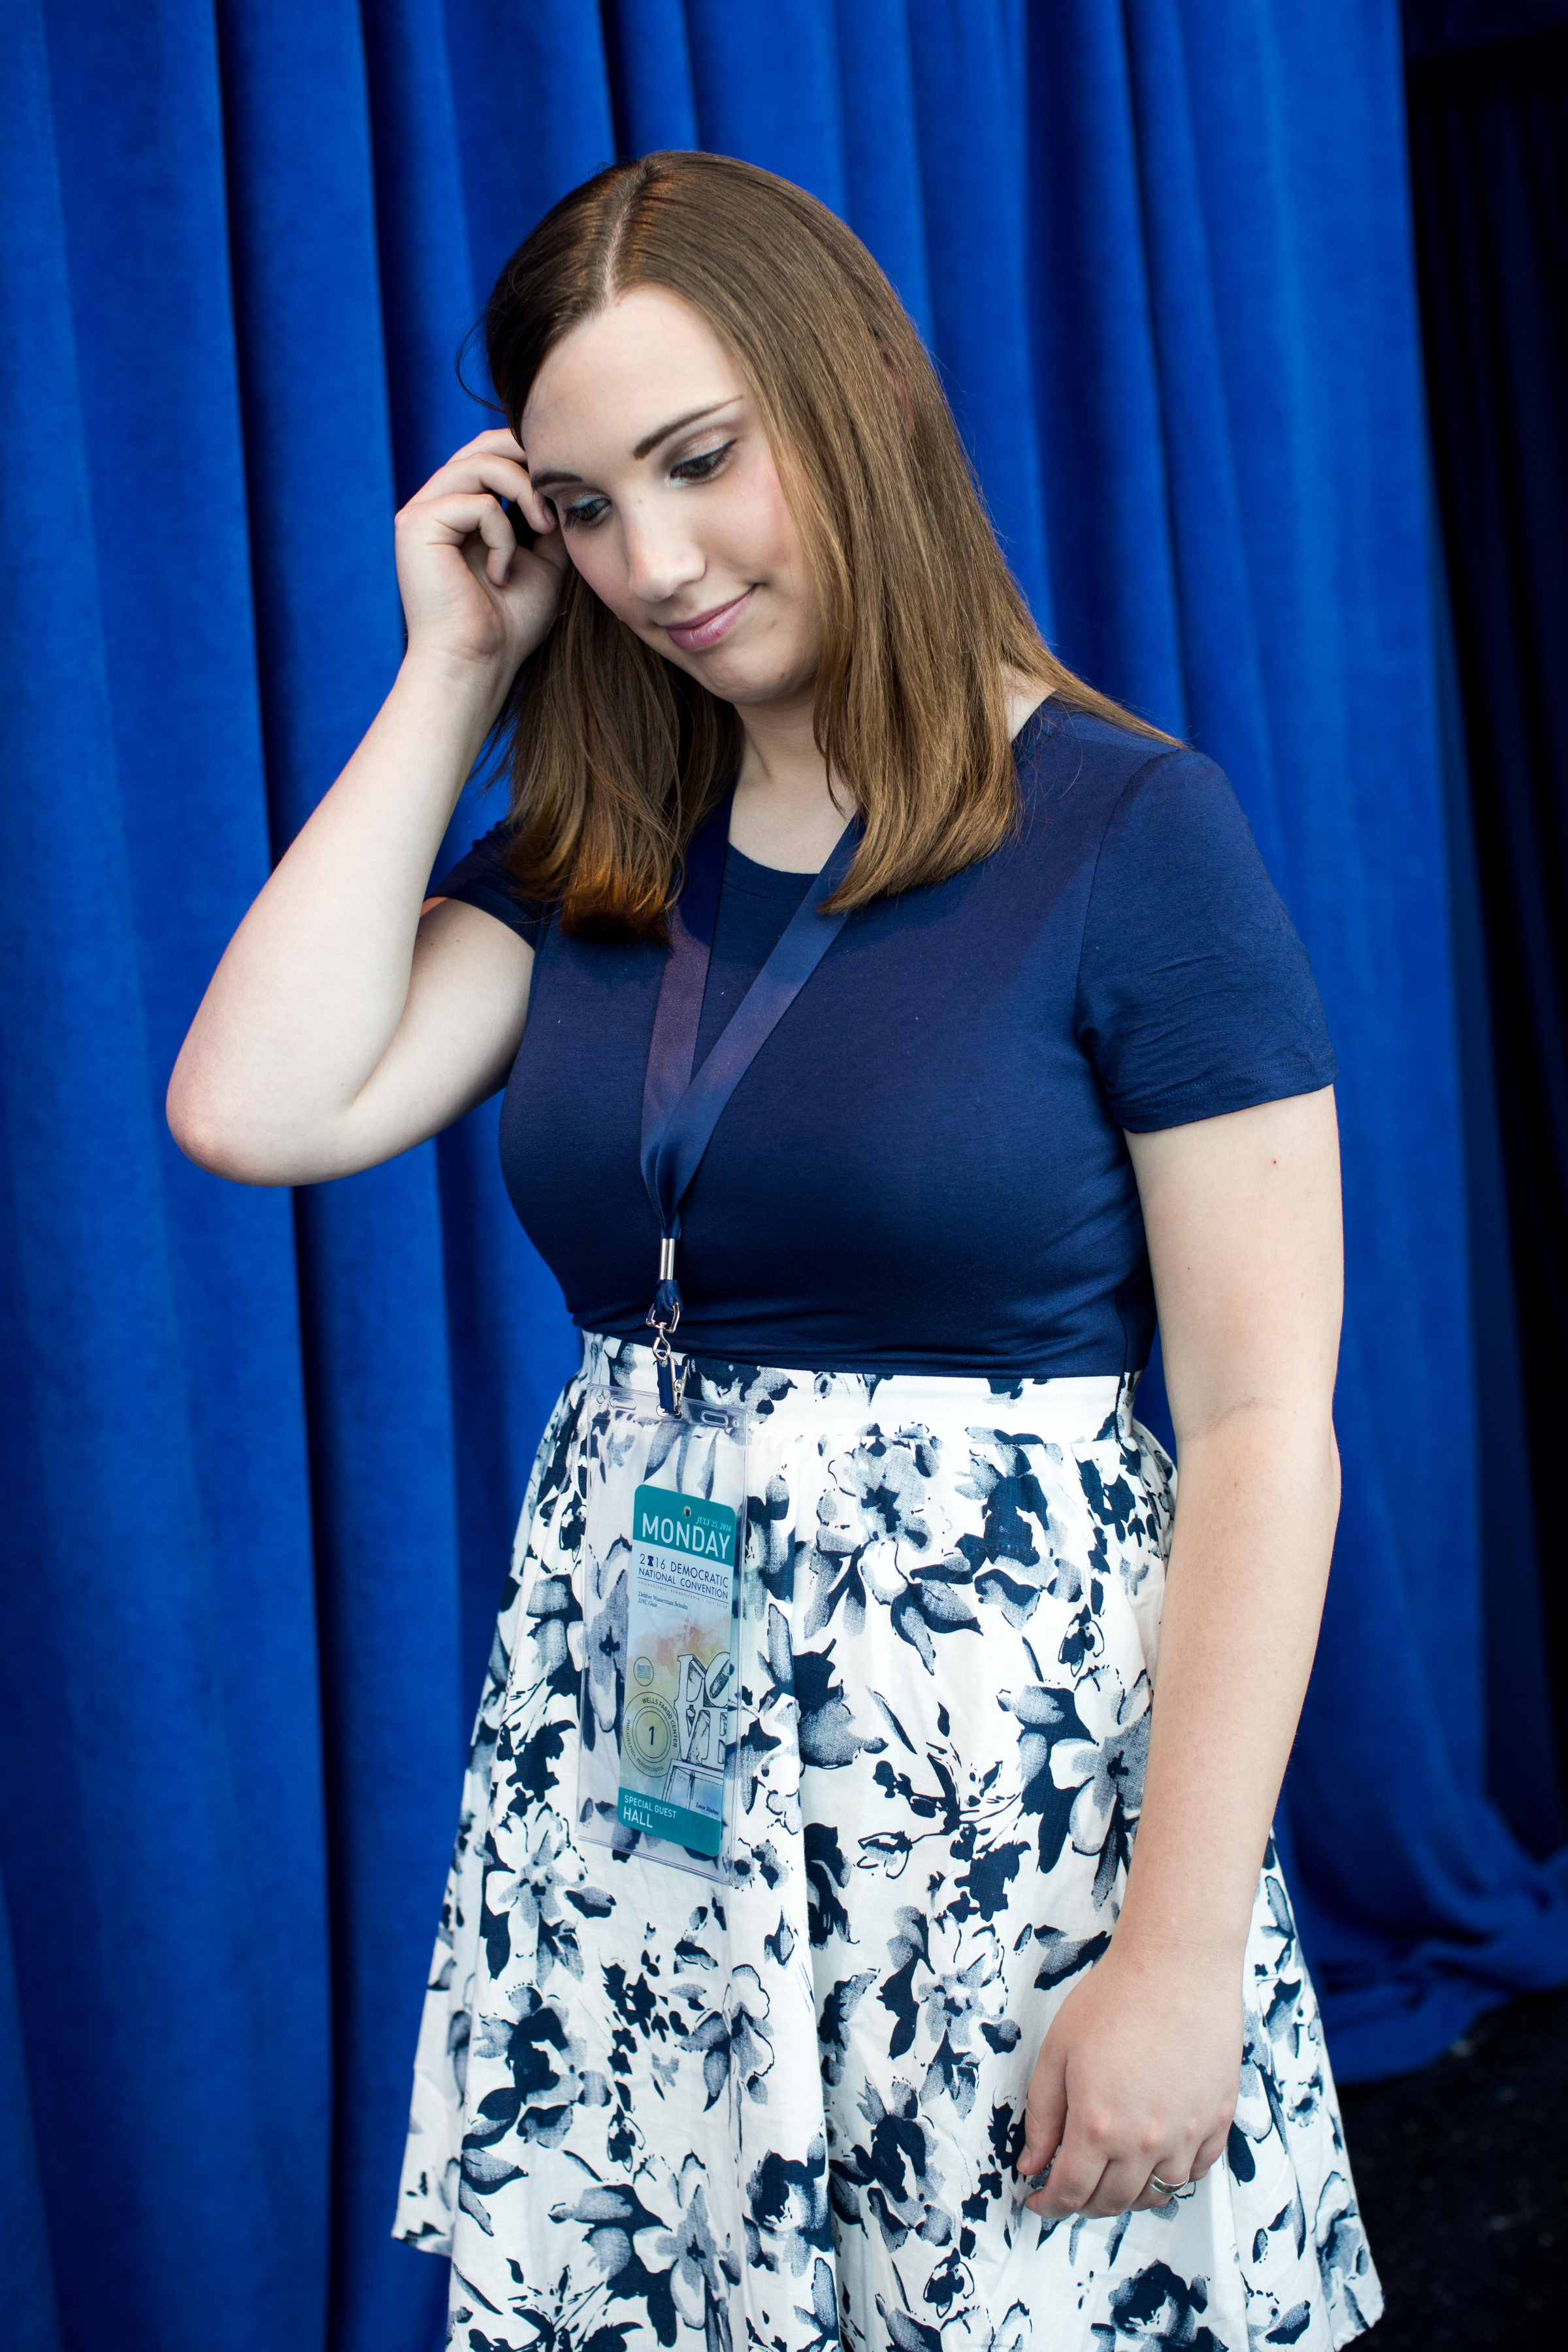 Sarah McBride posed for a portrait at the Wells Fargo Center where she is attending Democratic National Convention on July 25, 2016 in Philadelphia.(Natalie Keyssar for TIME)